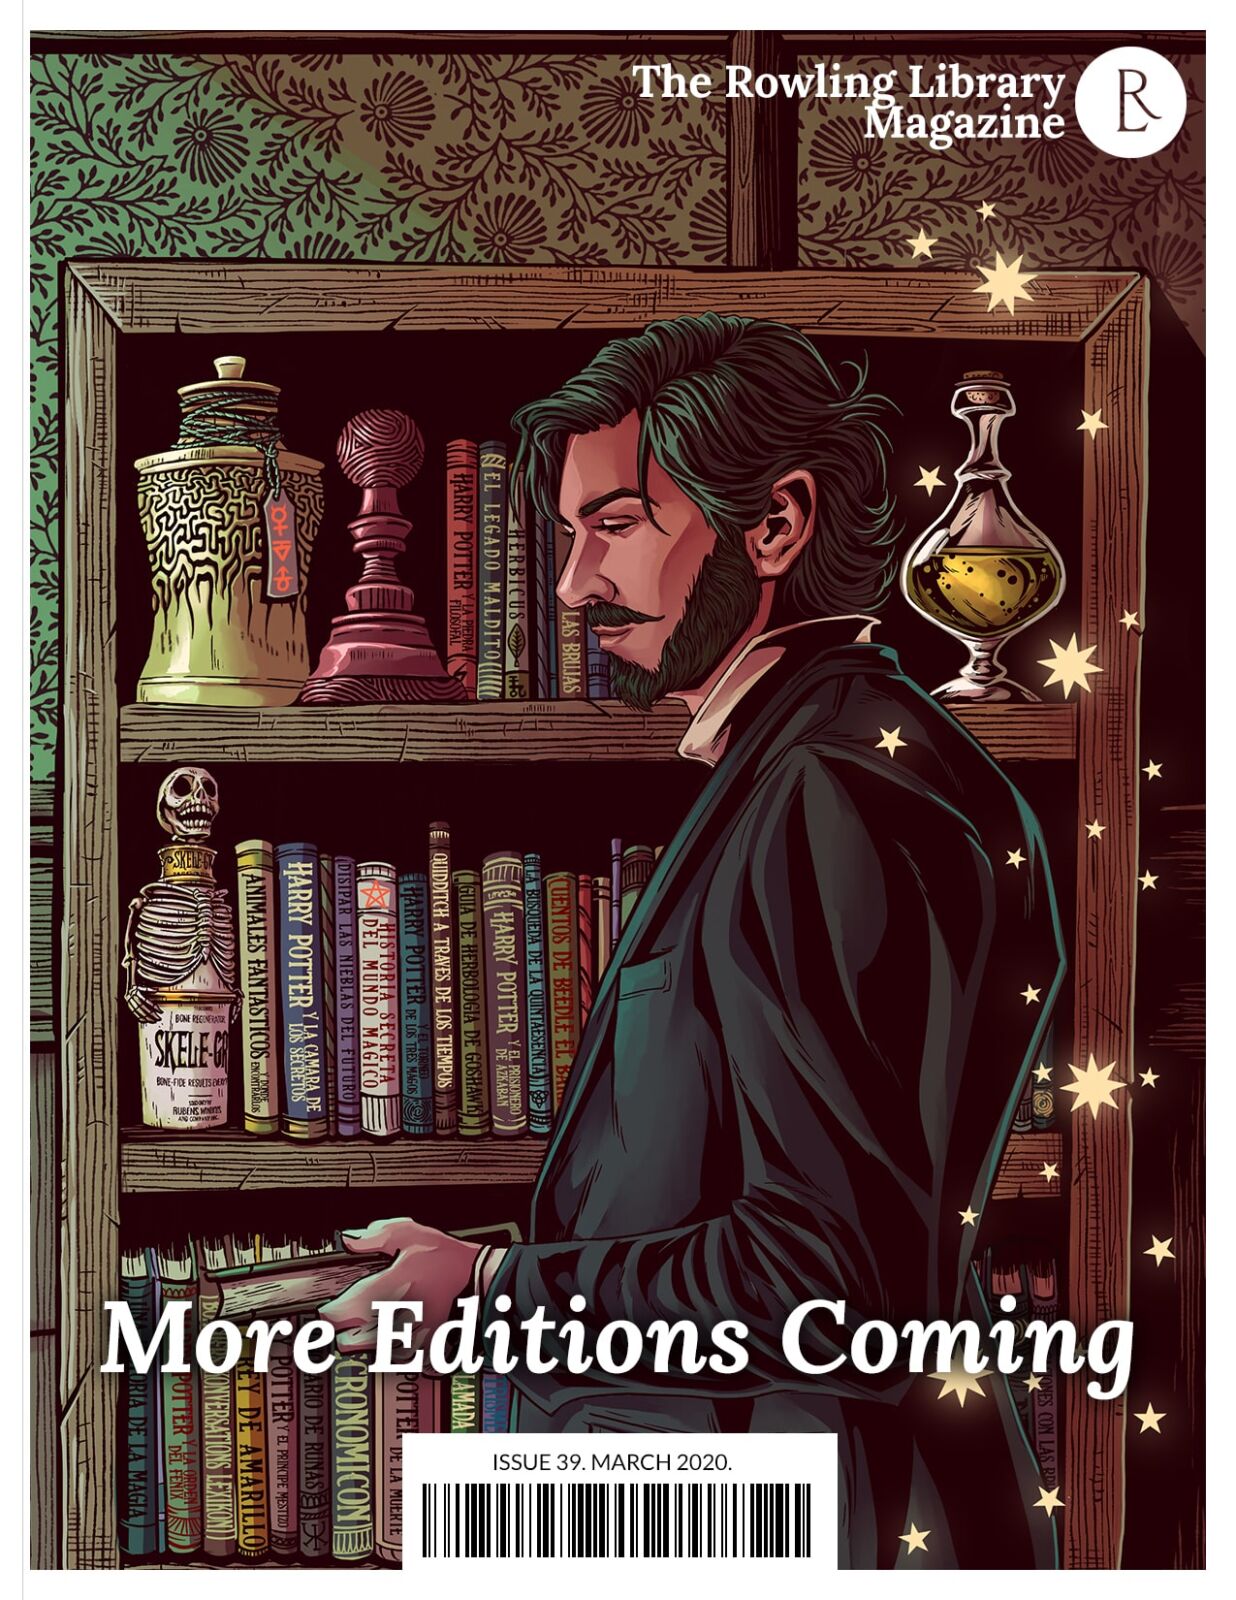 The Rowling Library Magazine #39 (March 2020): More Editions Coming